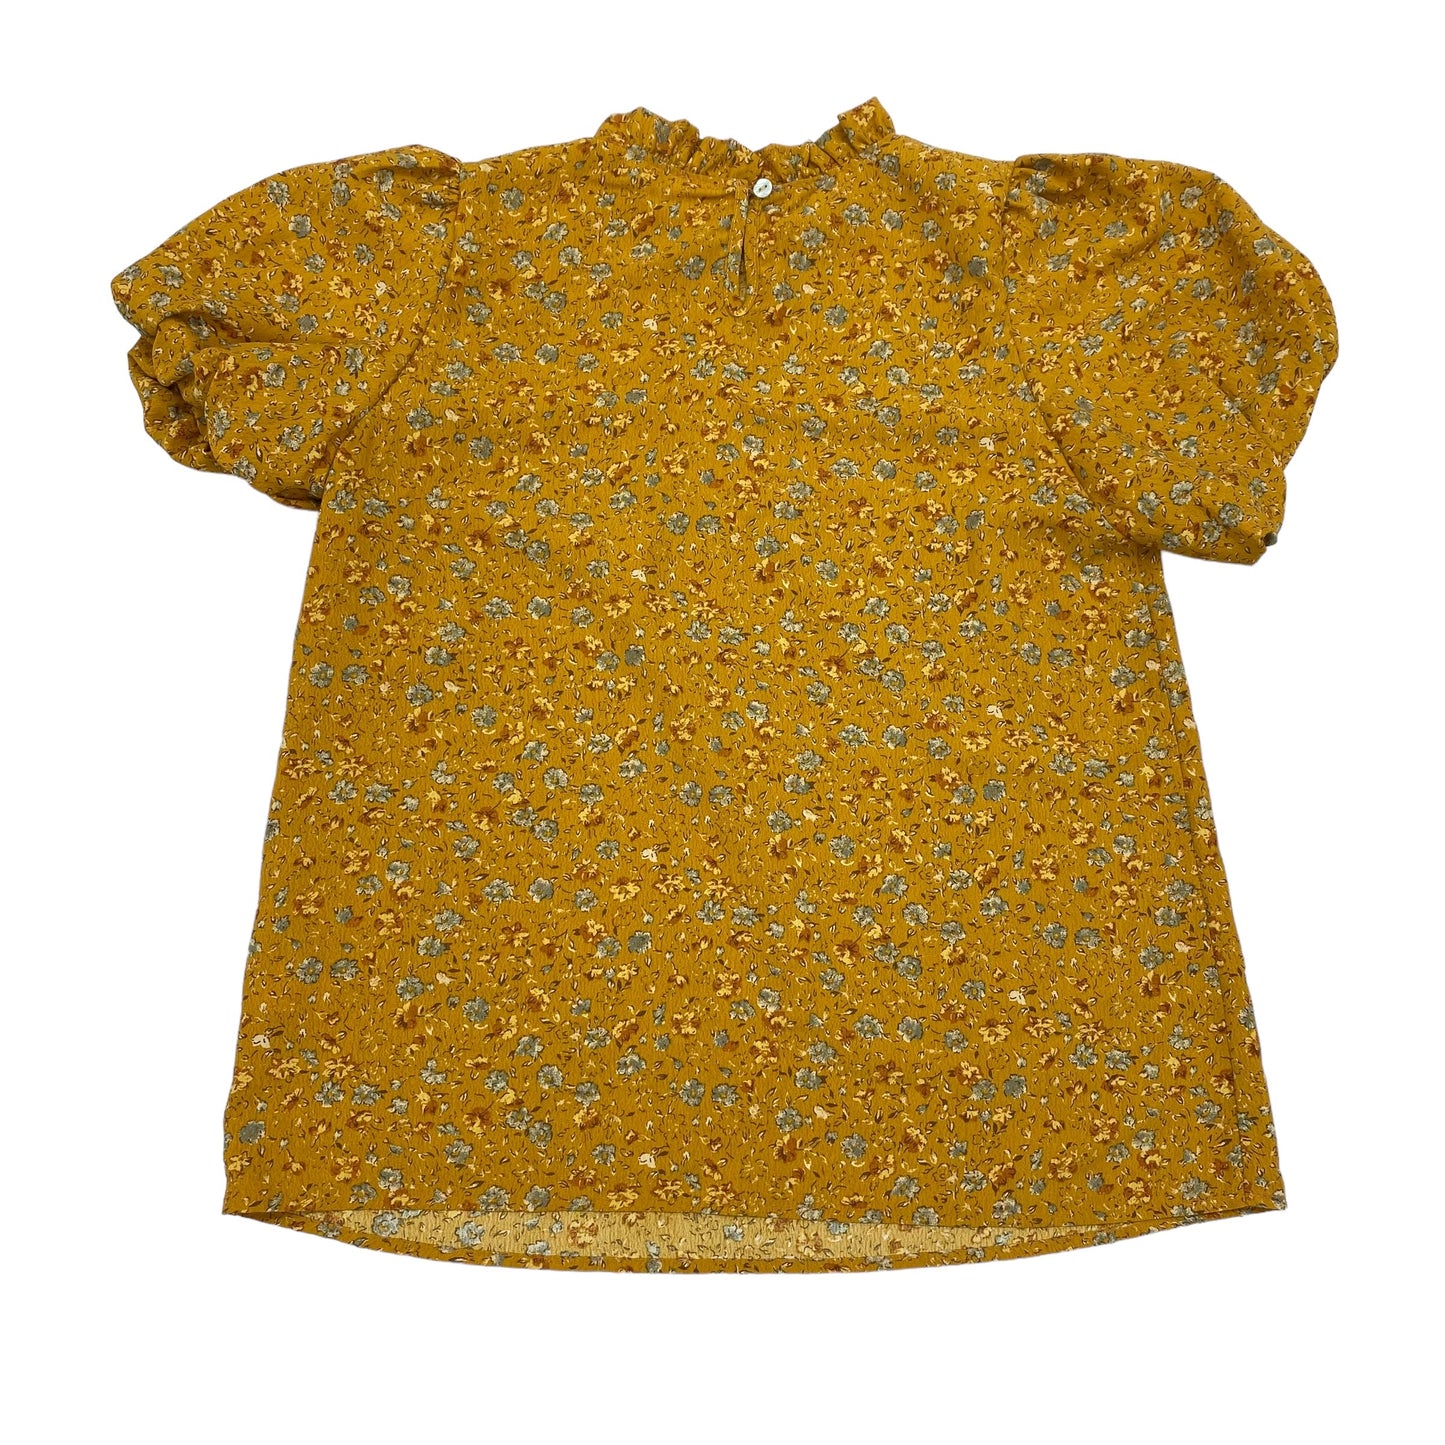 YELLOW LES AMIS TOP SS, Size S